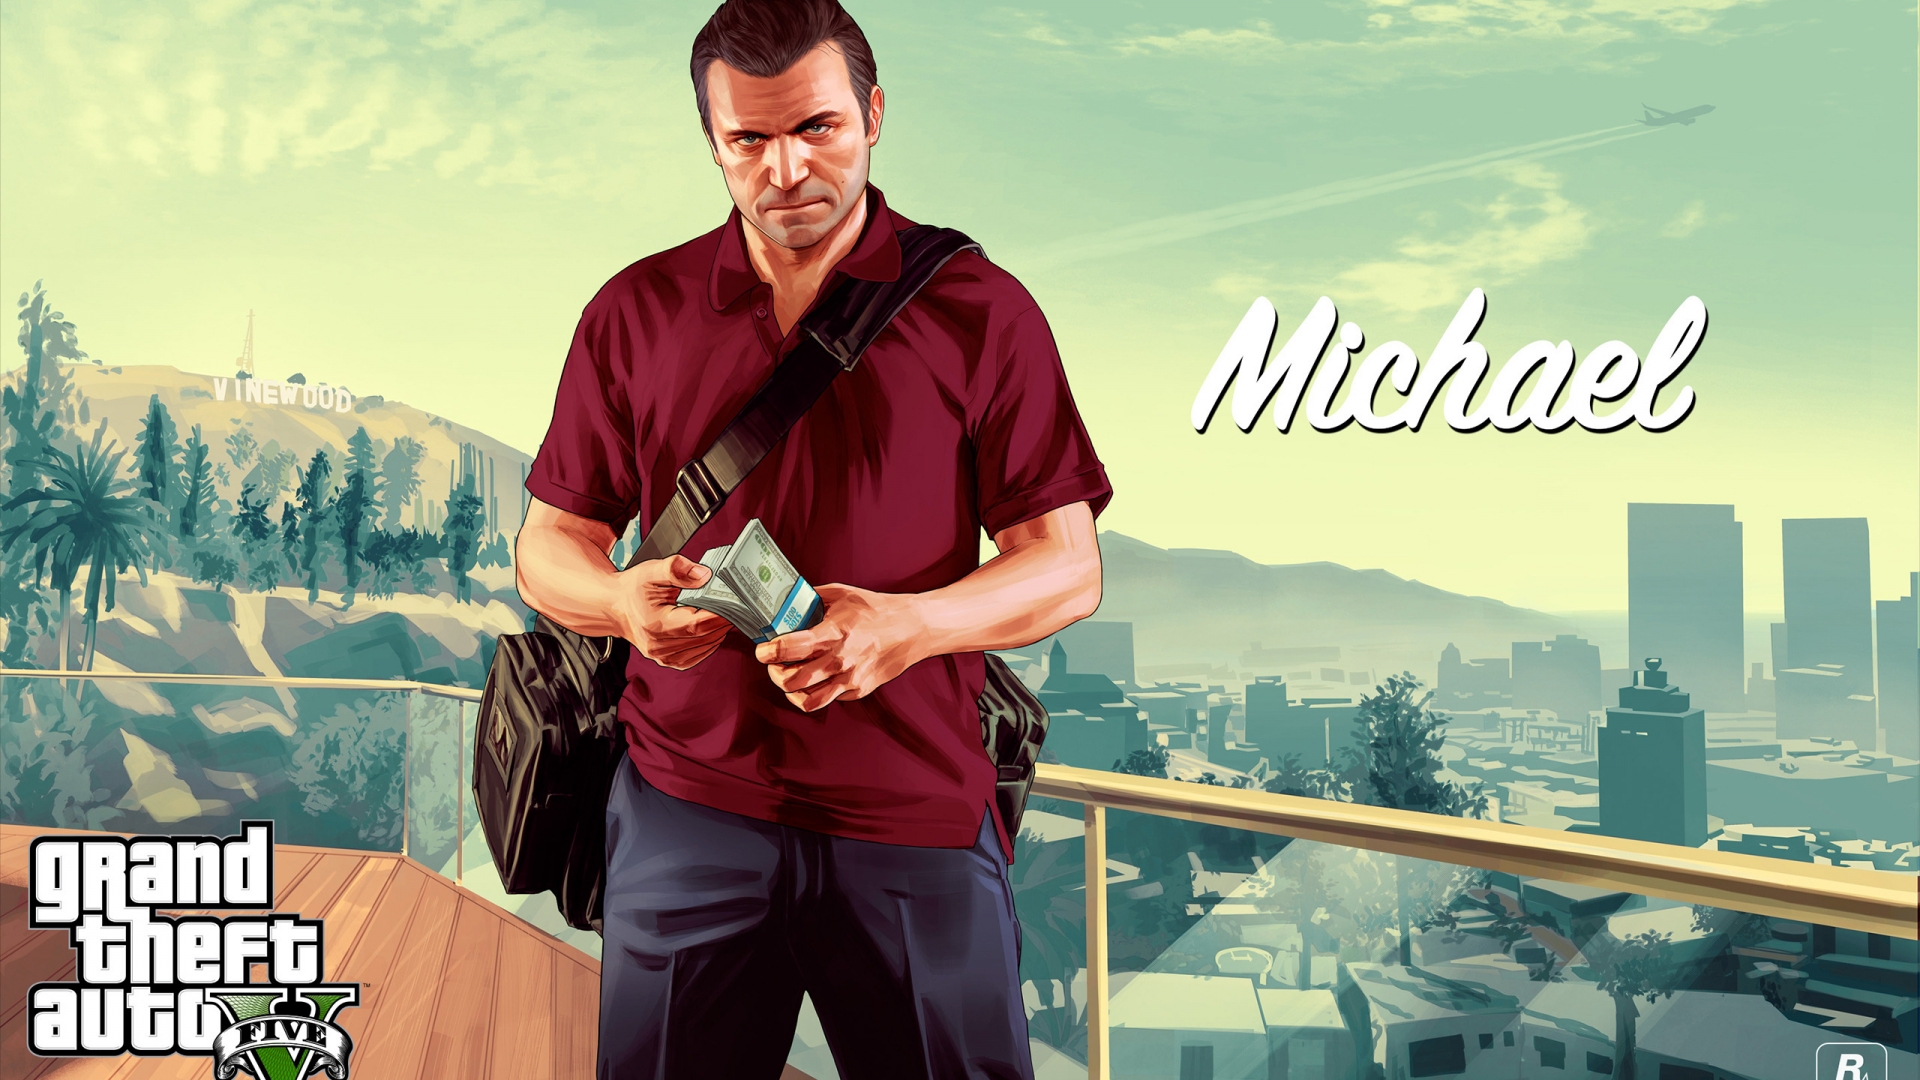 Michael with Money GTA V for 1920 x 1080 HDTV 1080p resolution